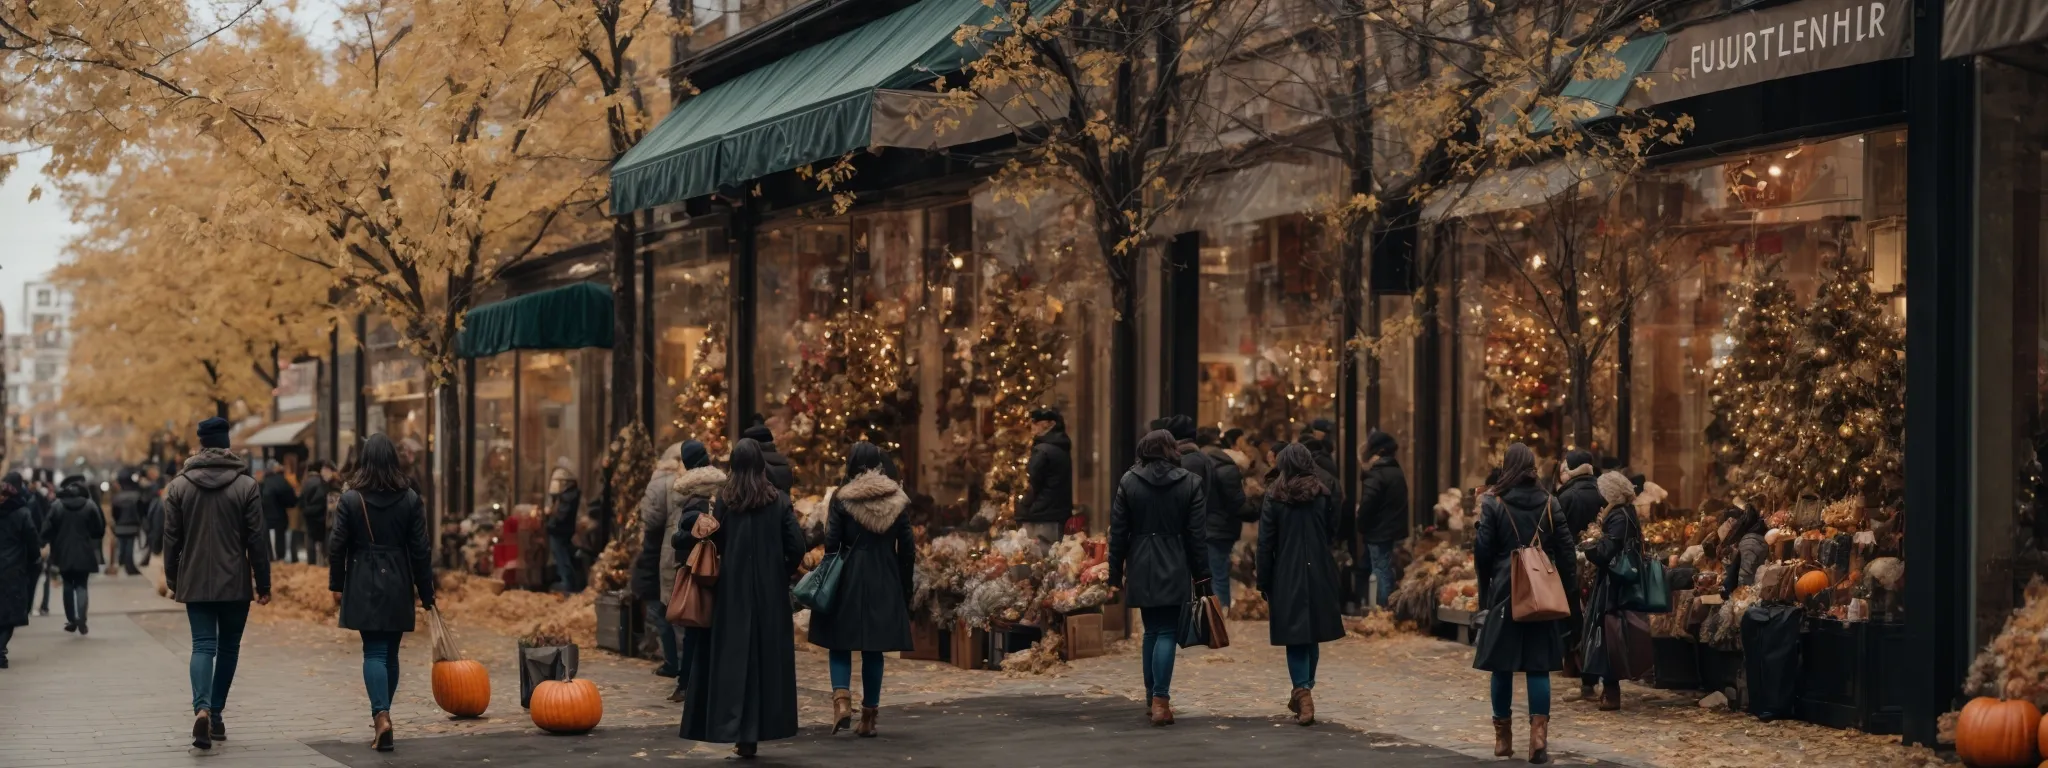 a bustling shopping street transitioning from autumn to winter, as holiday decorations begin to appear in store windows.